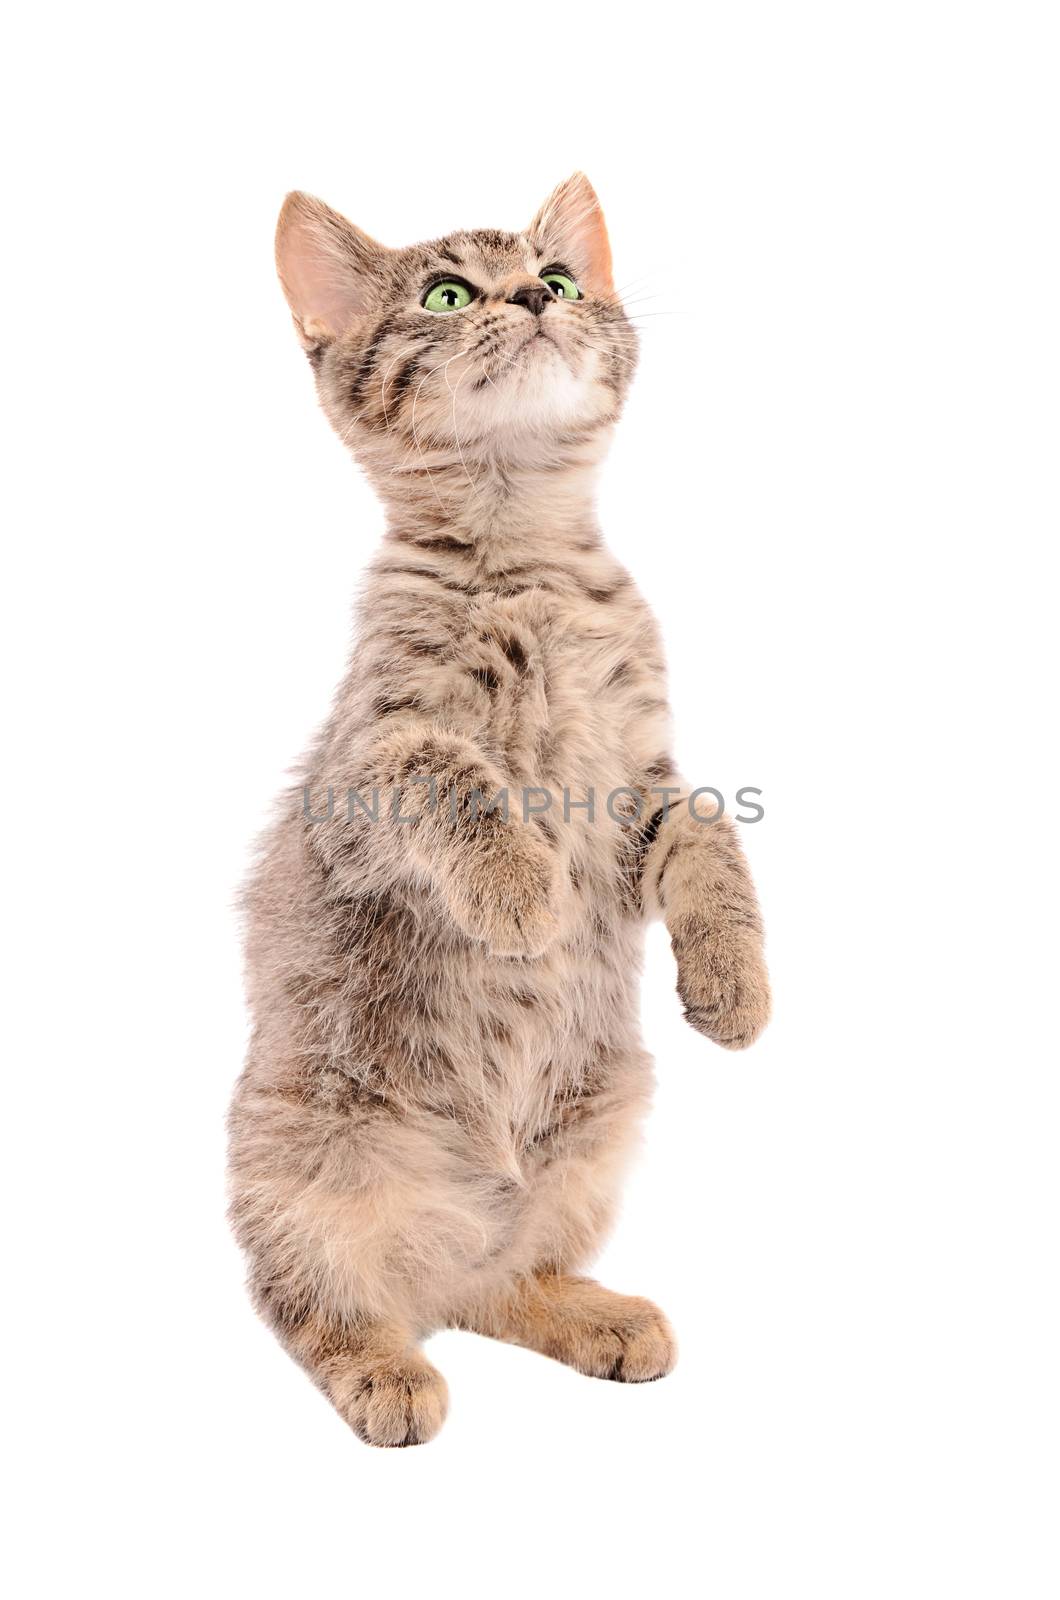 Cute tabby kitten standing up on a white background